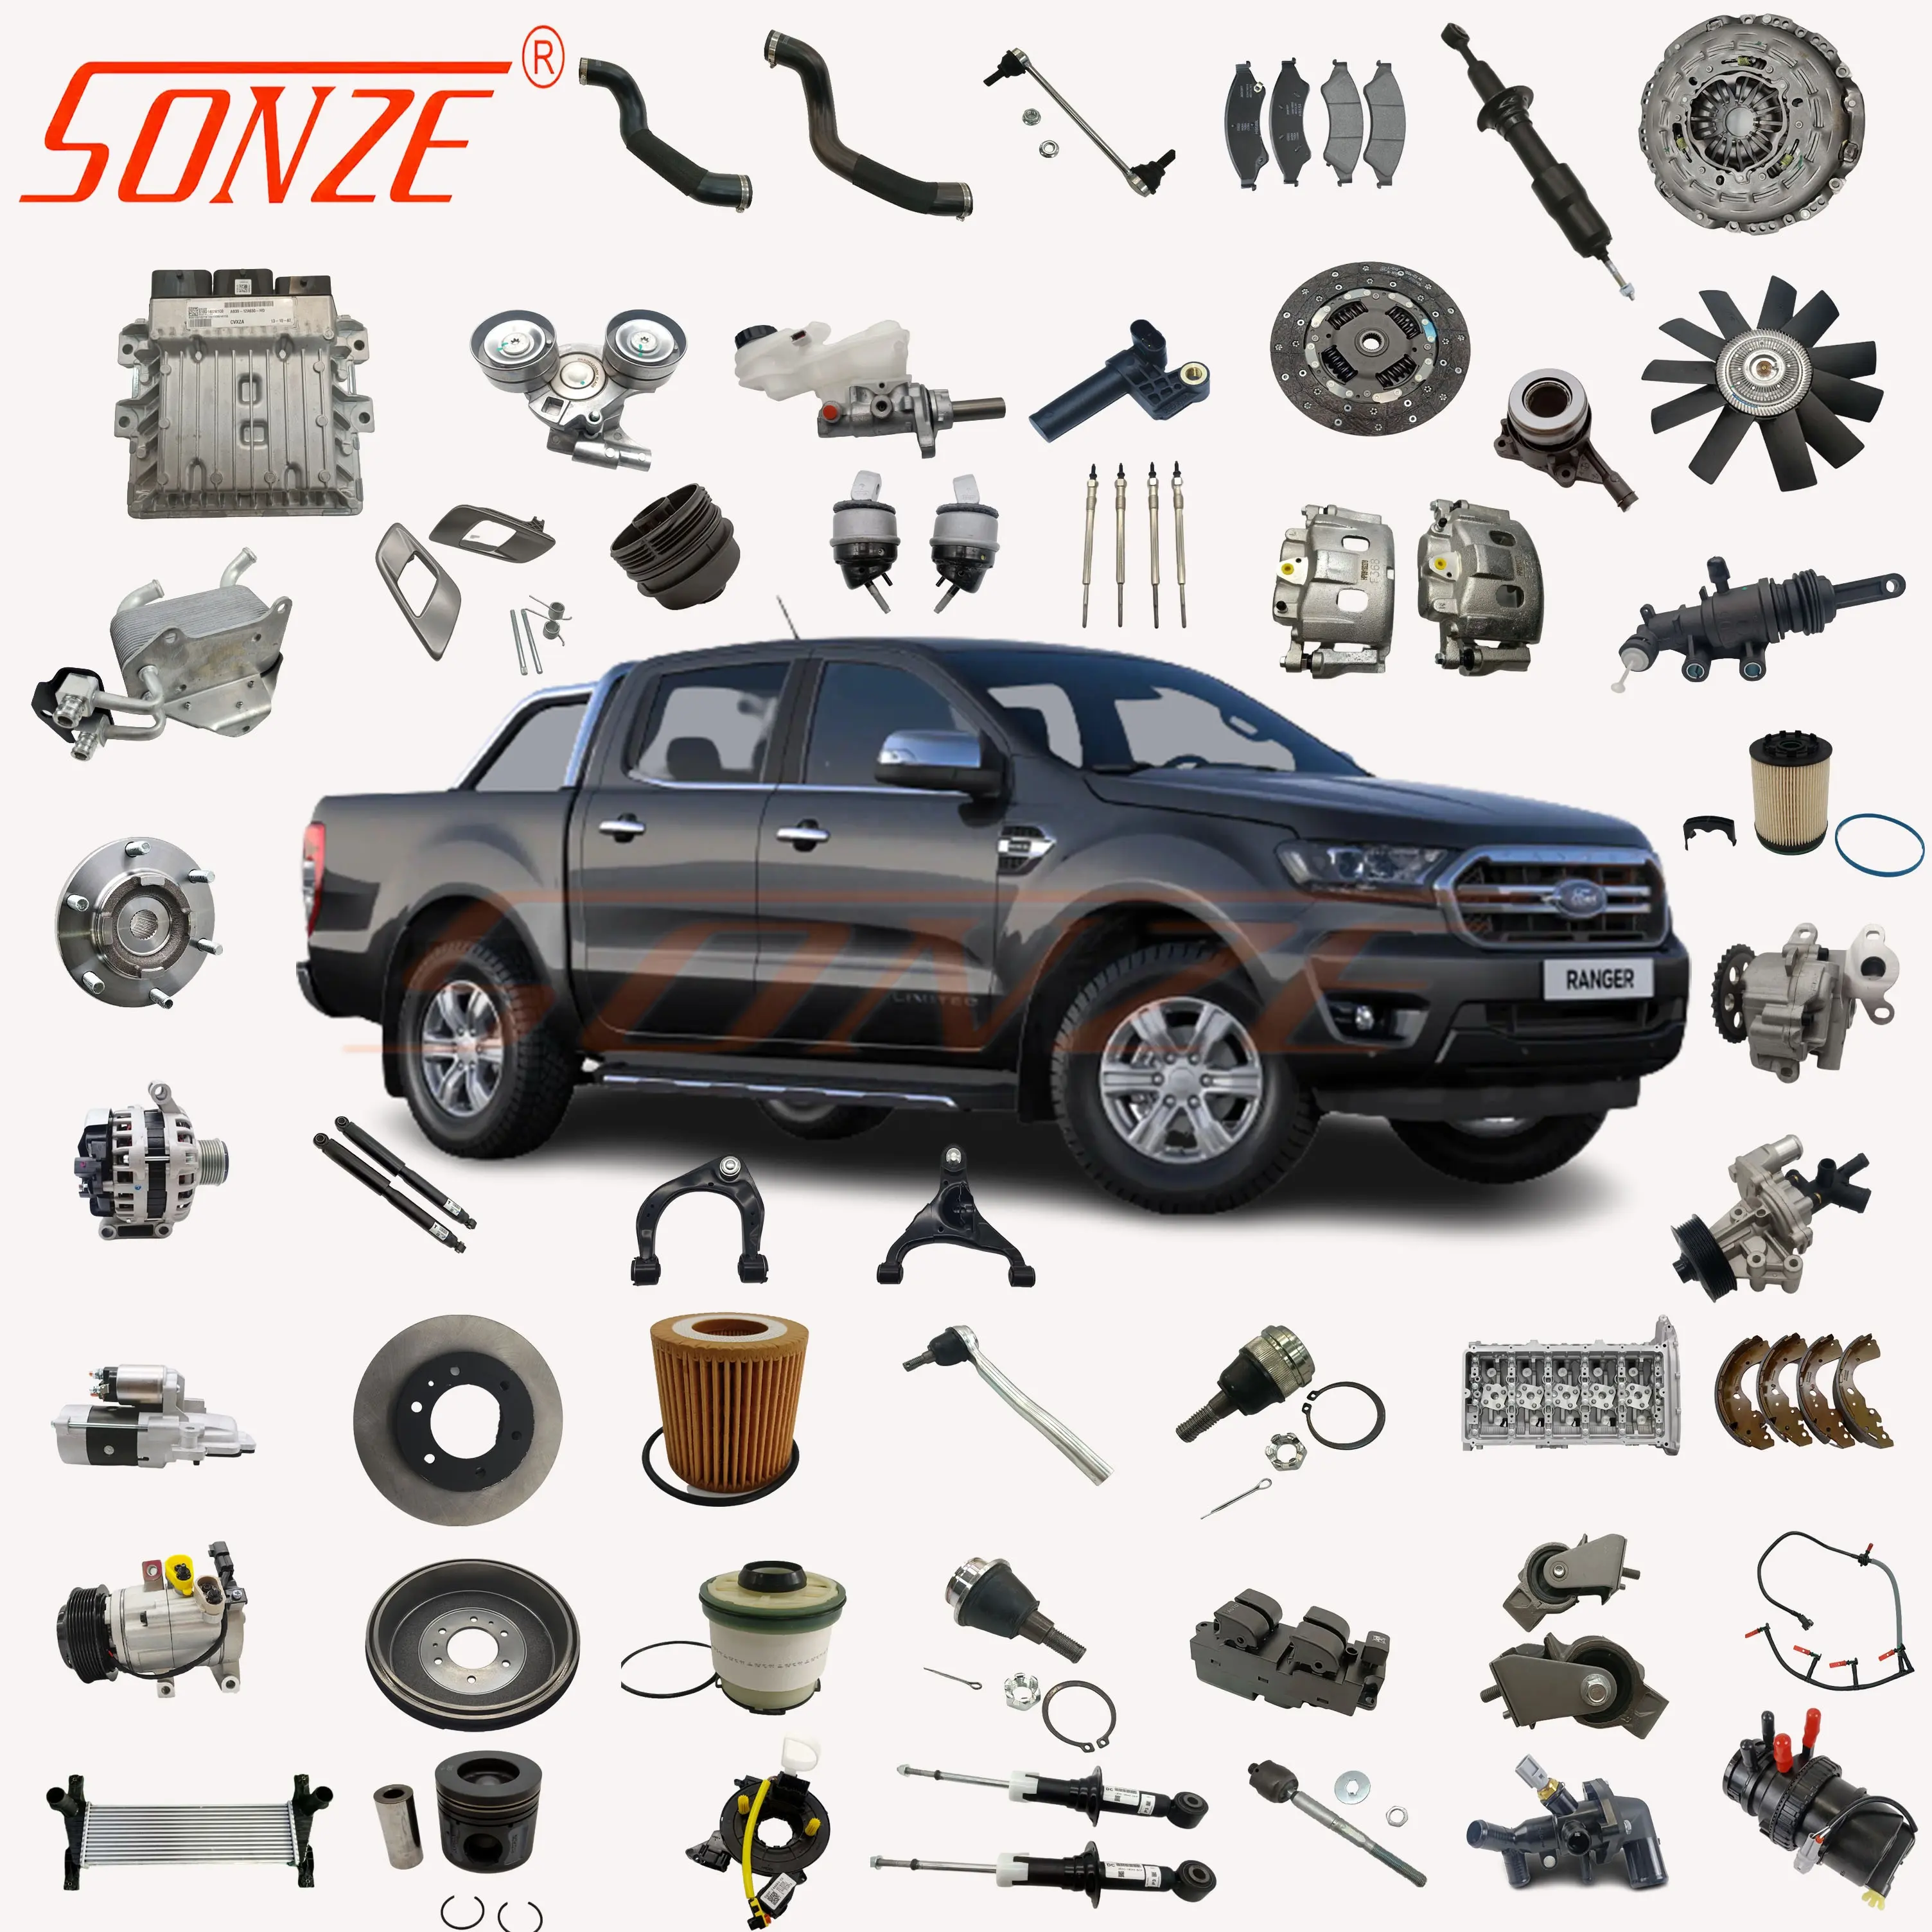 All Auto Spare Parts Engine Parts Chassis Parts for Ford Ranger Mazda BT50